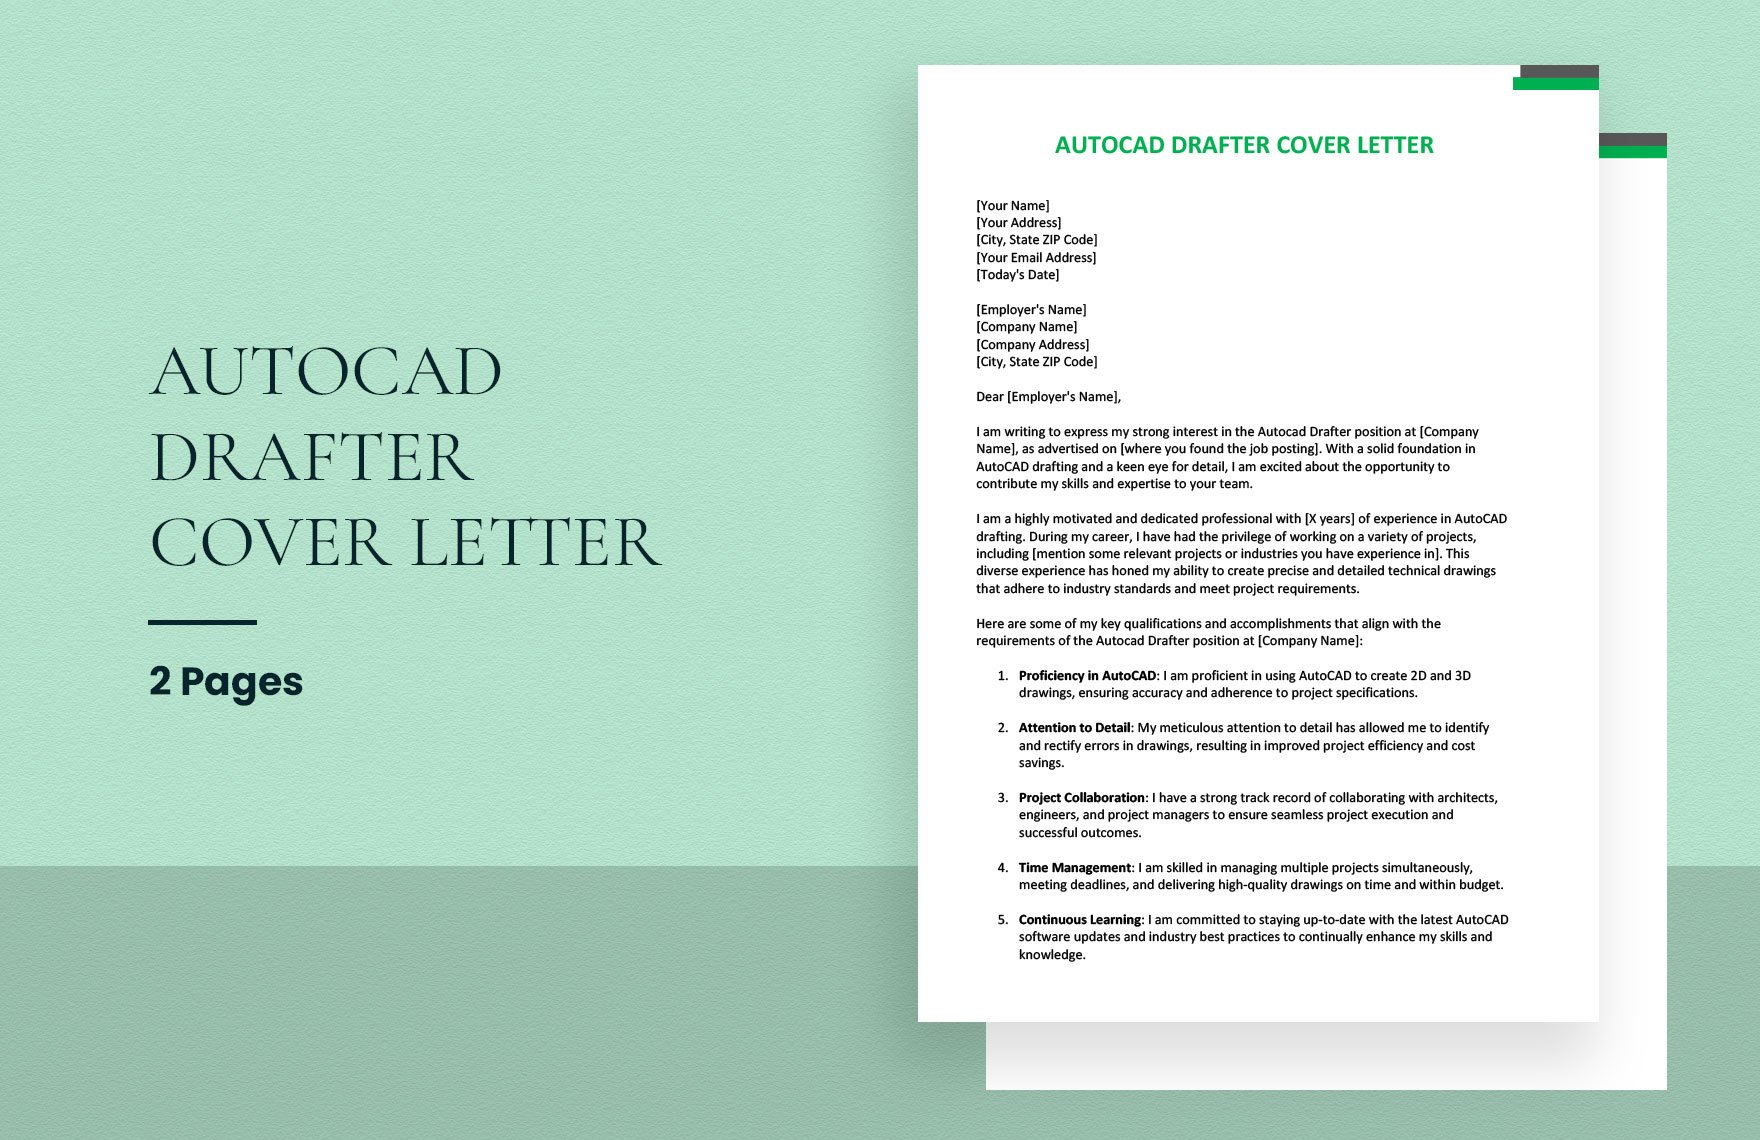 Autocad Drafter Cover Letter